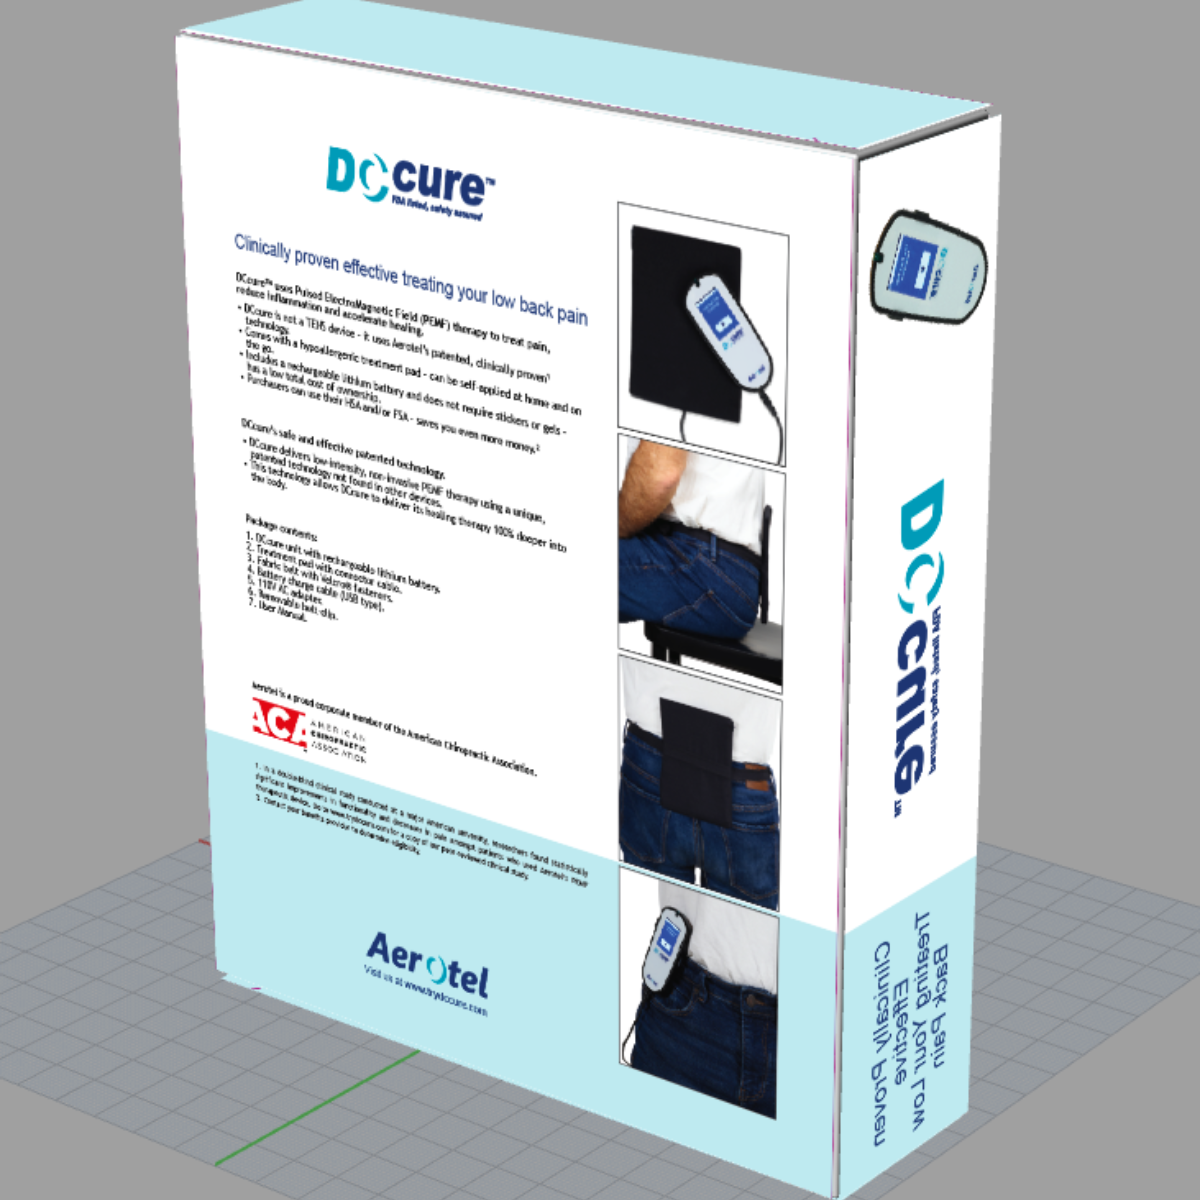 DCcure PEMF Therapy Back Pain Relief by Aerotel